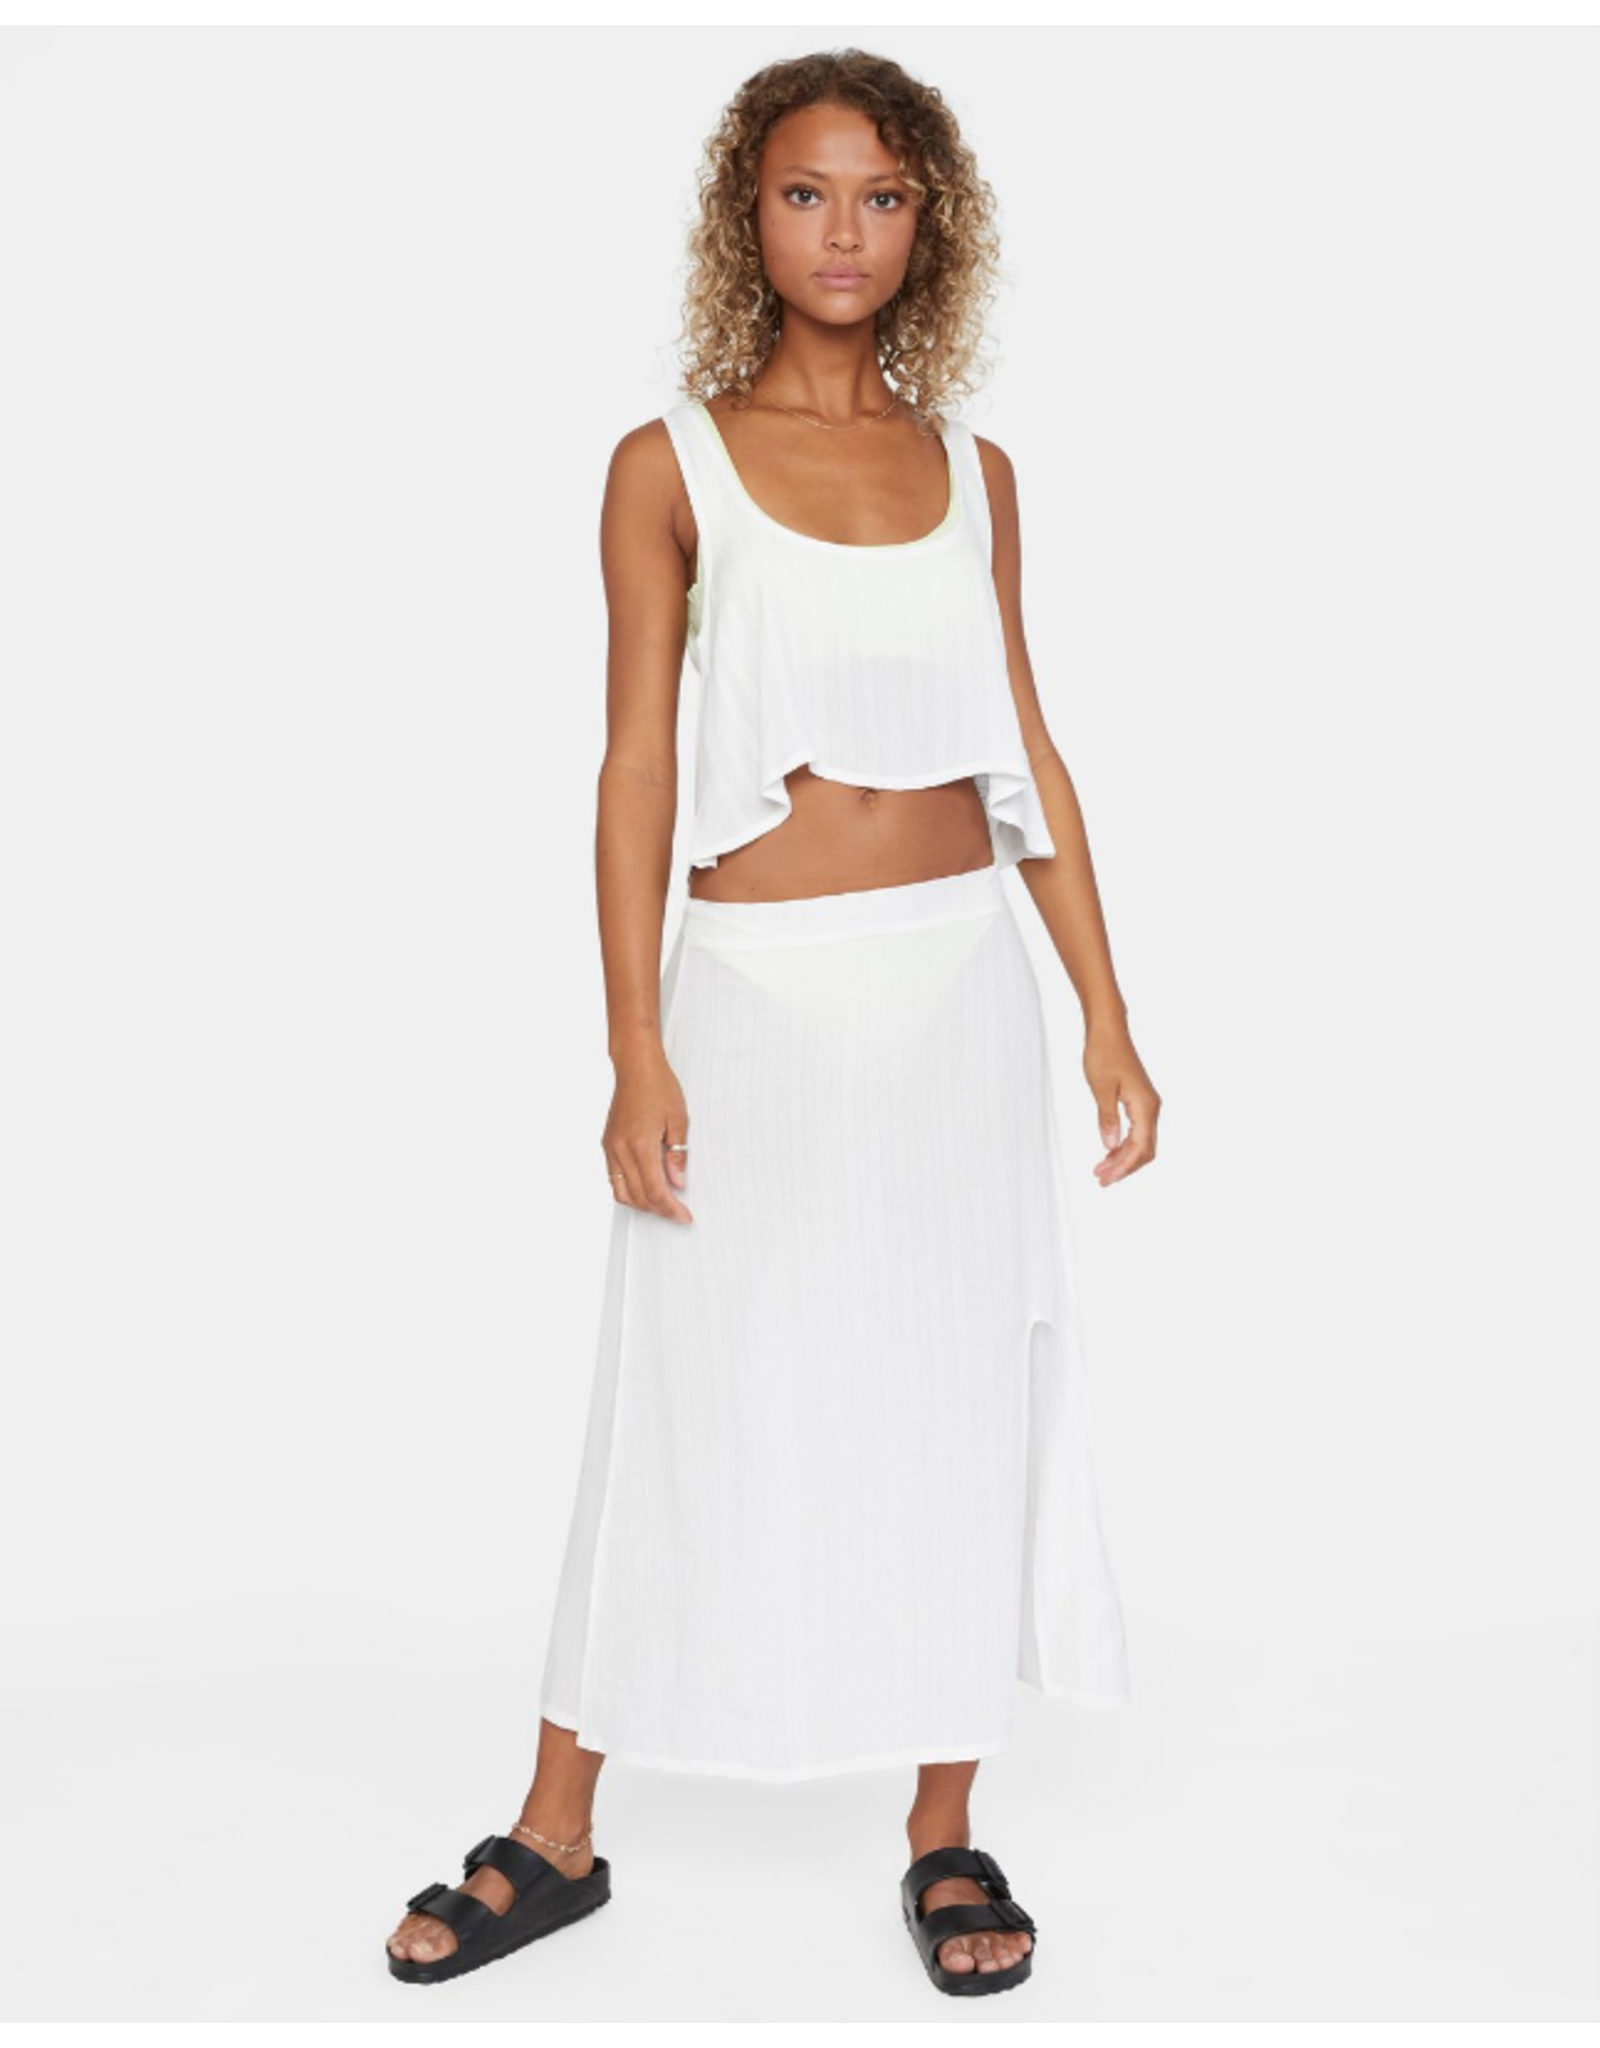 RVCA Girls SAVE 1 12 AFTER HOURS SOLID SKIRT